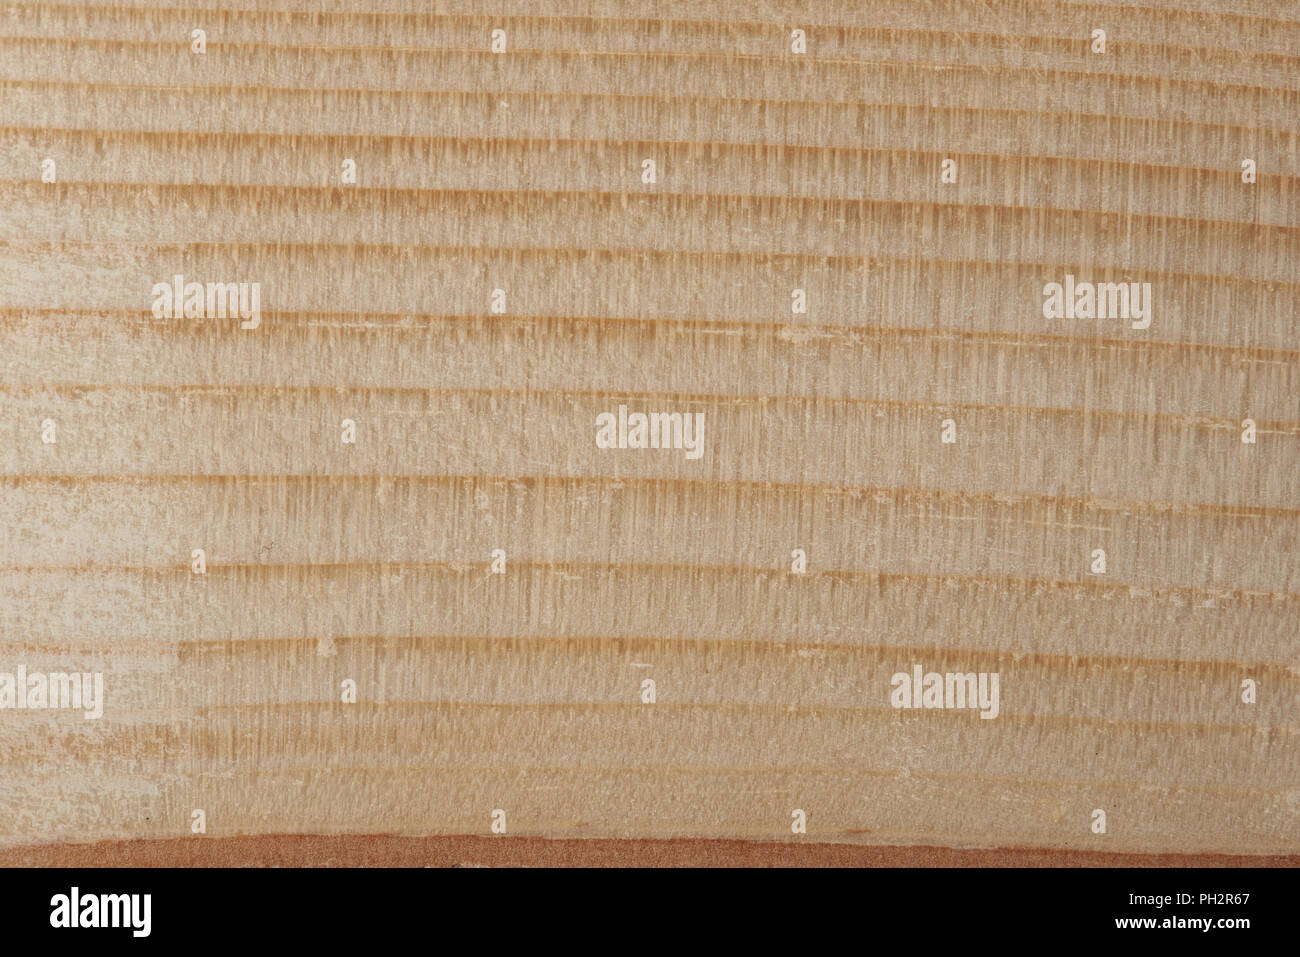 Stripped wooden texture background. Brown wood surface theme Stock Photo